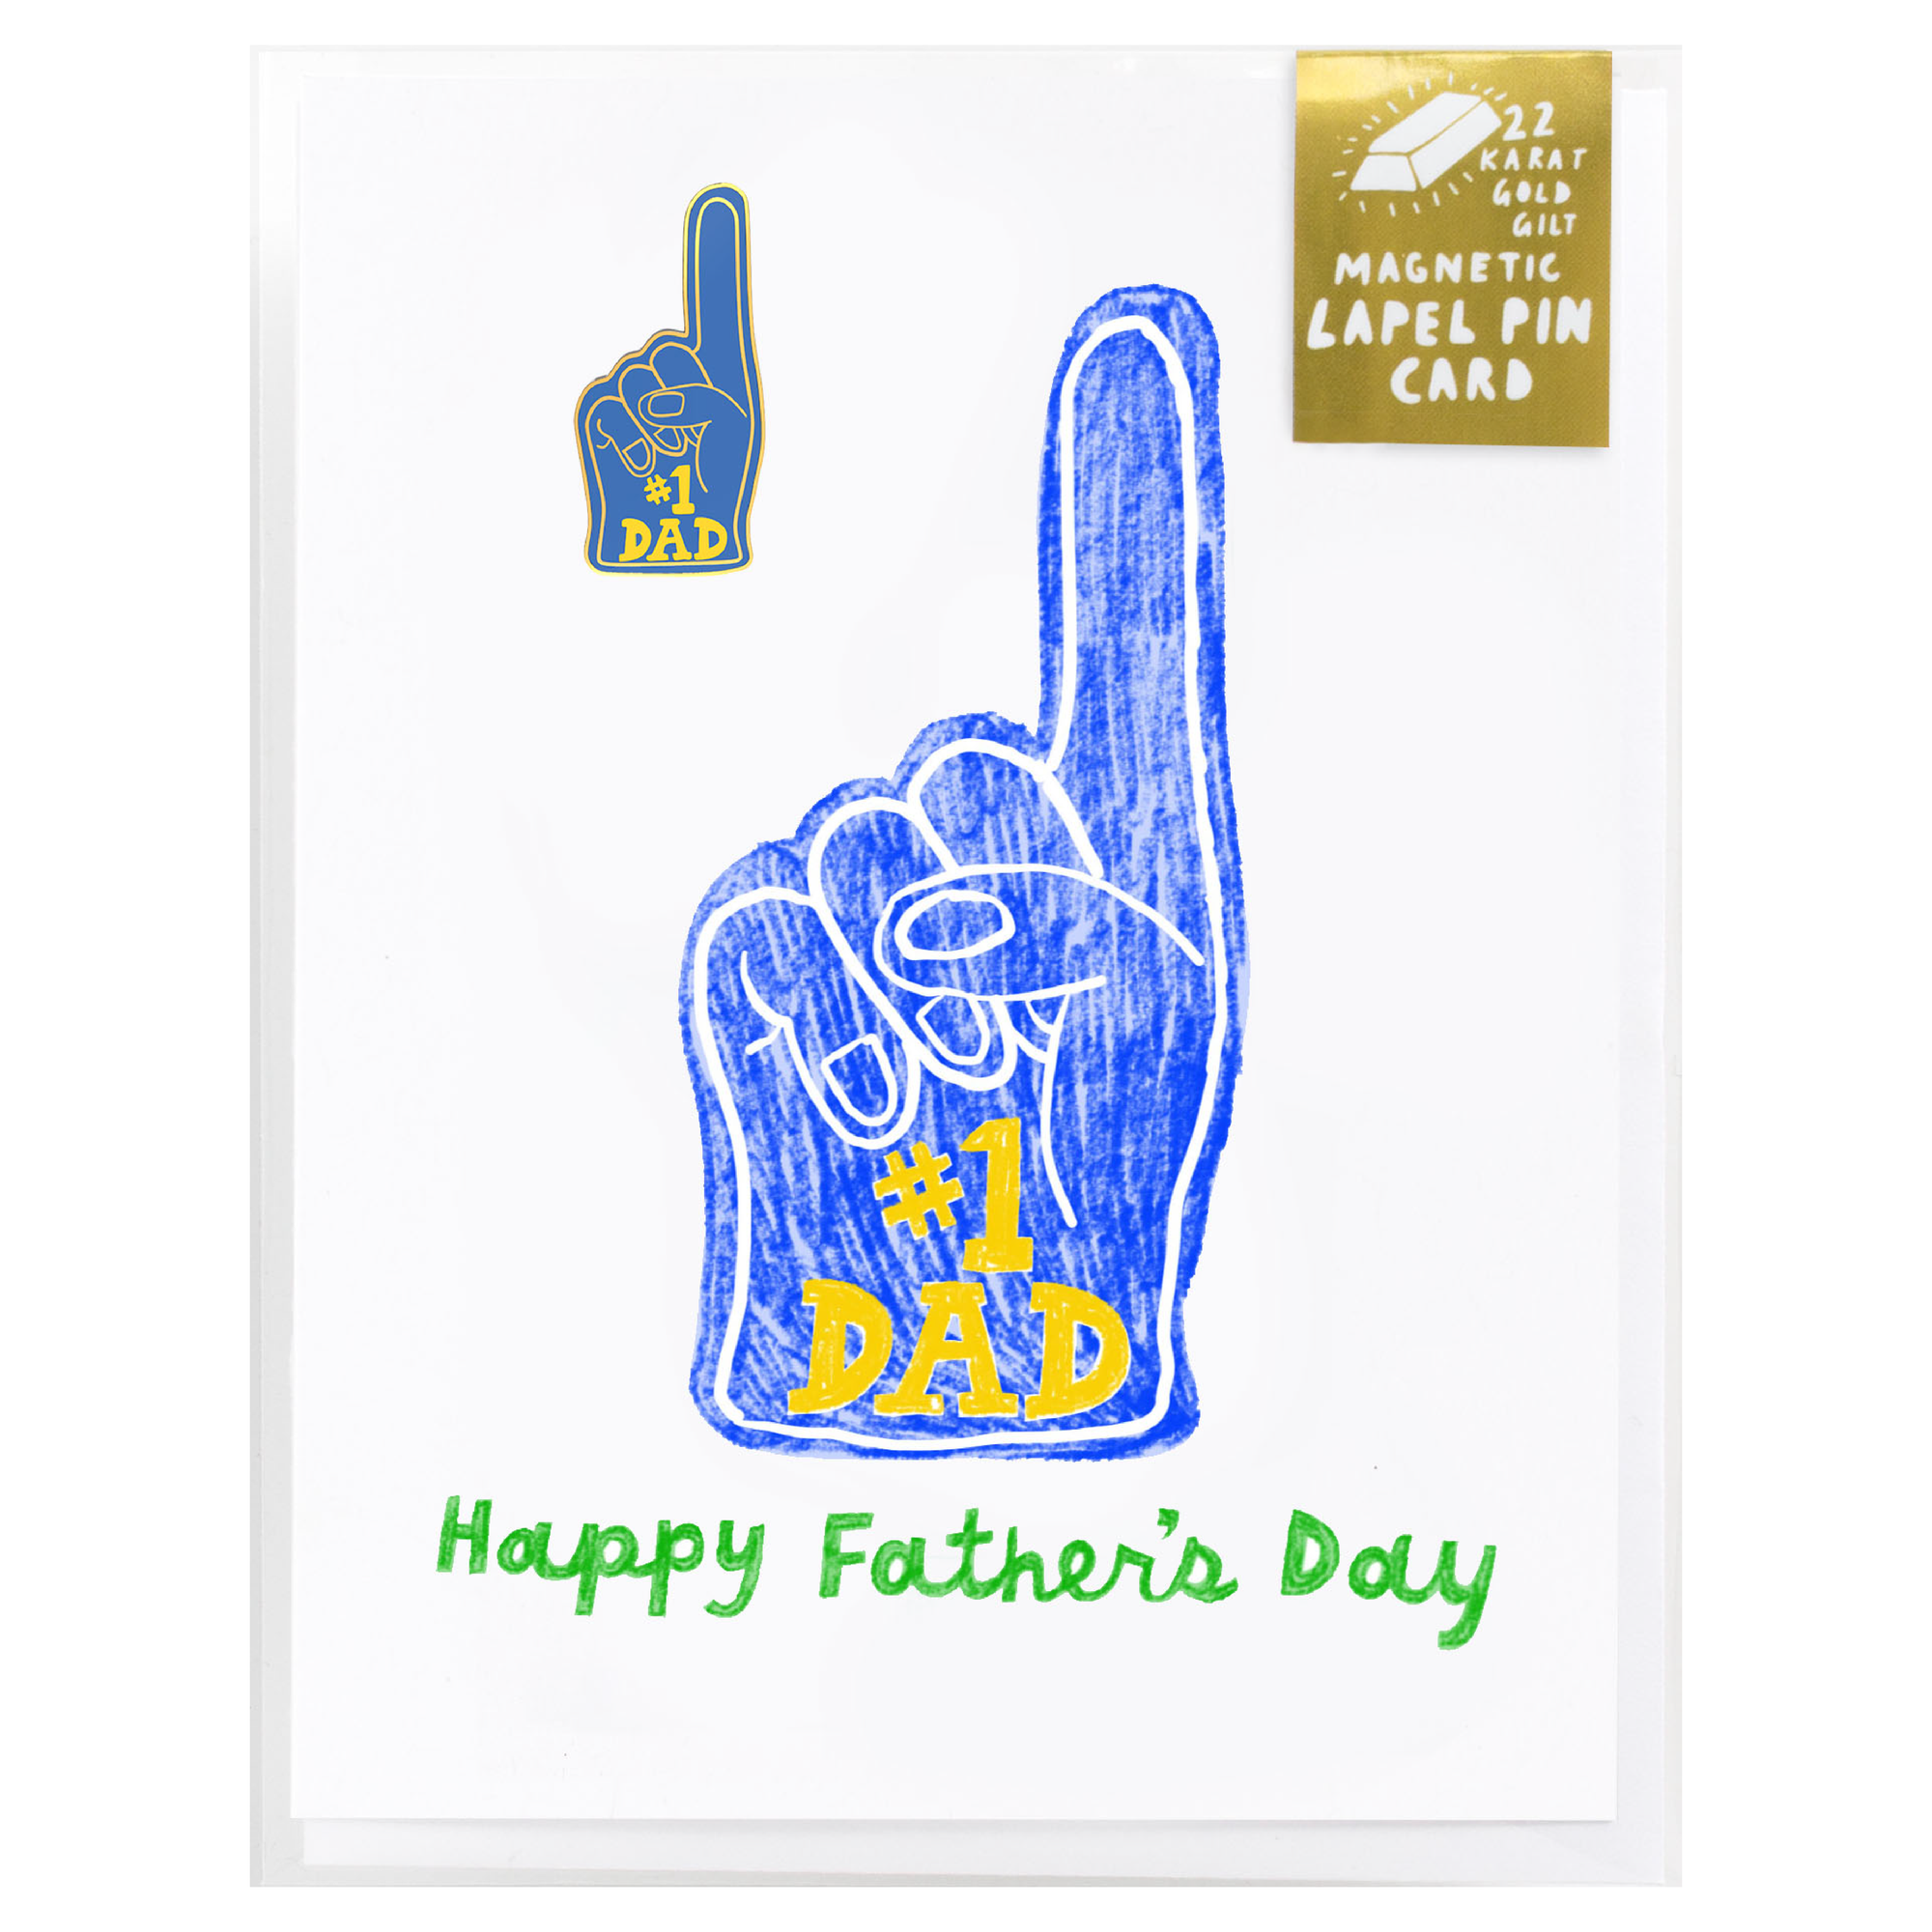 #1 Dad Happy Father's Day - Lapel Pin Card